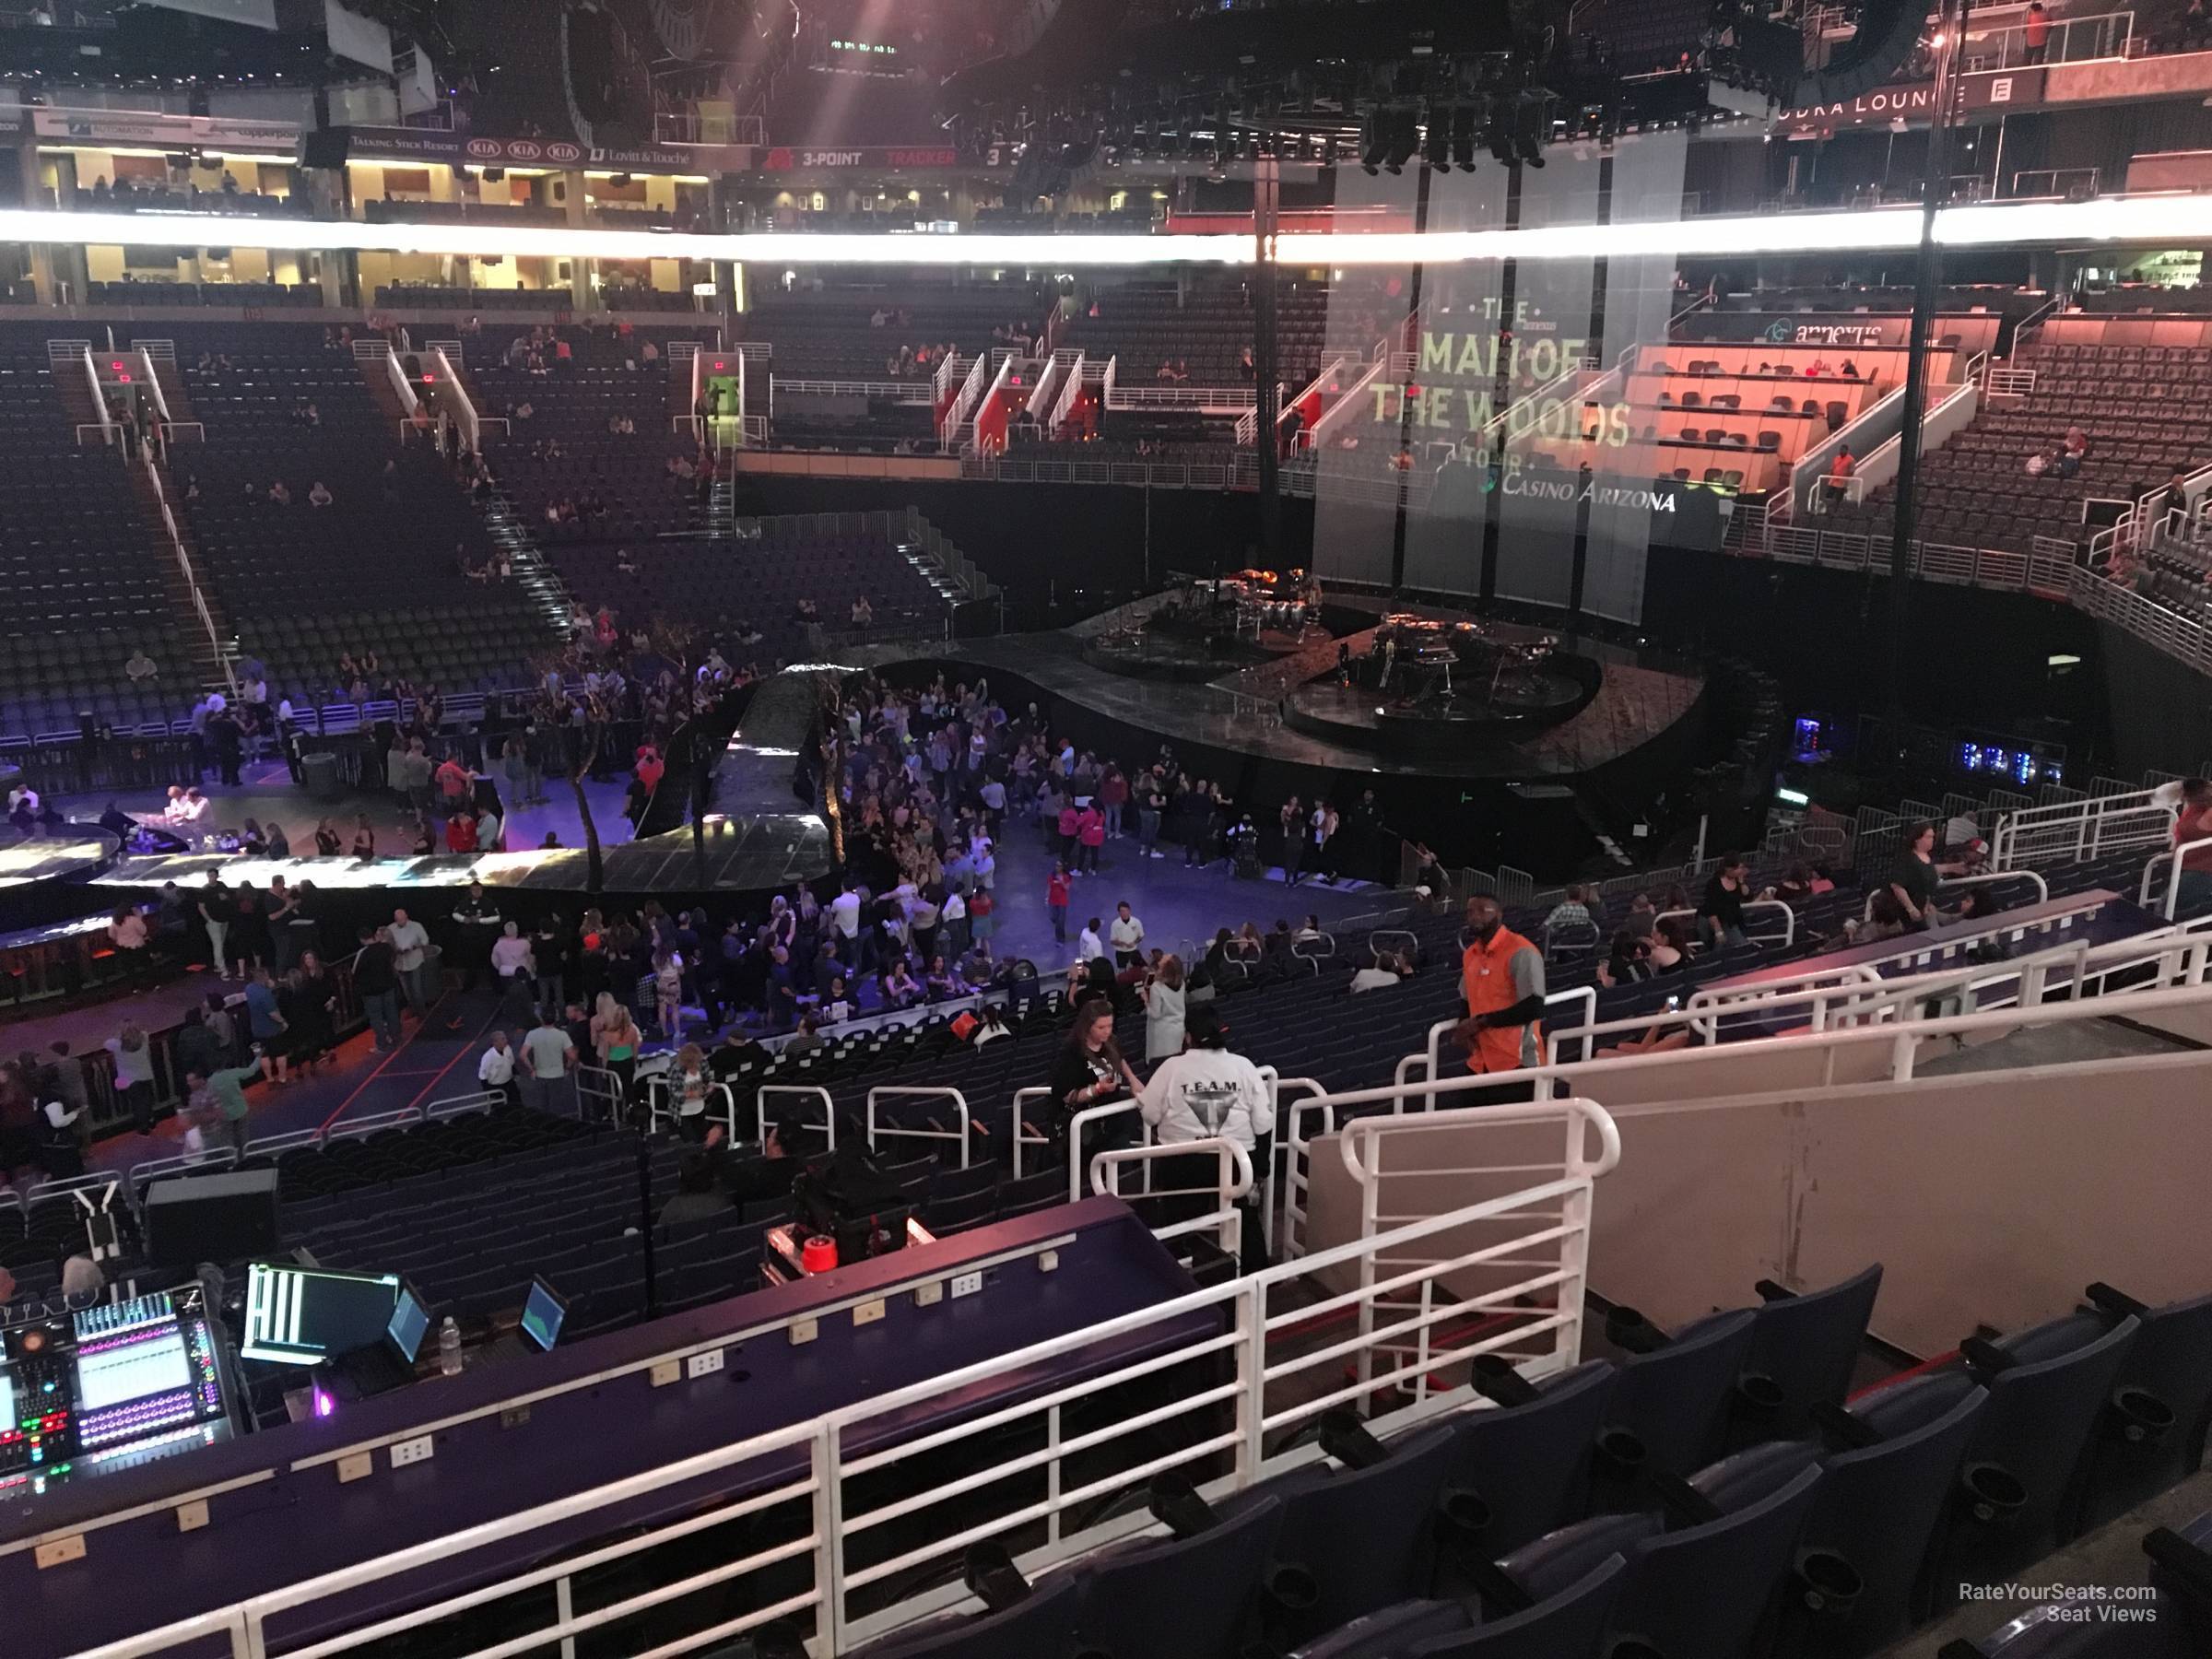 Talking Stick Resort Arena Seating Chart With Rows